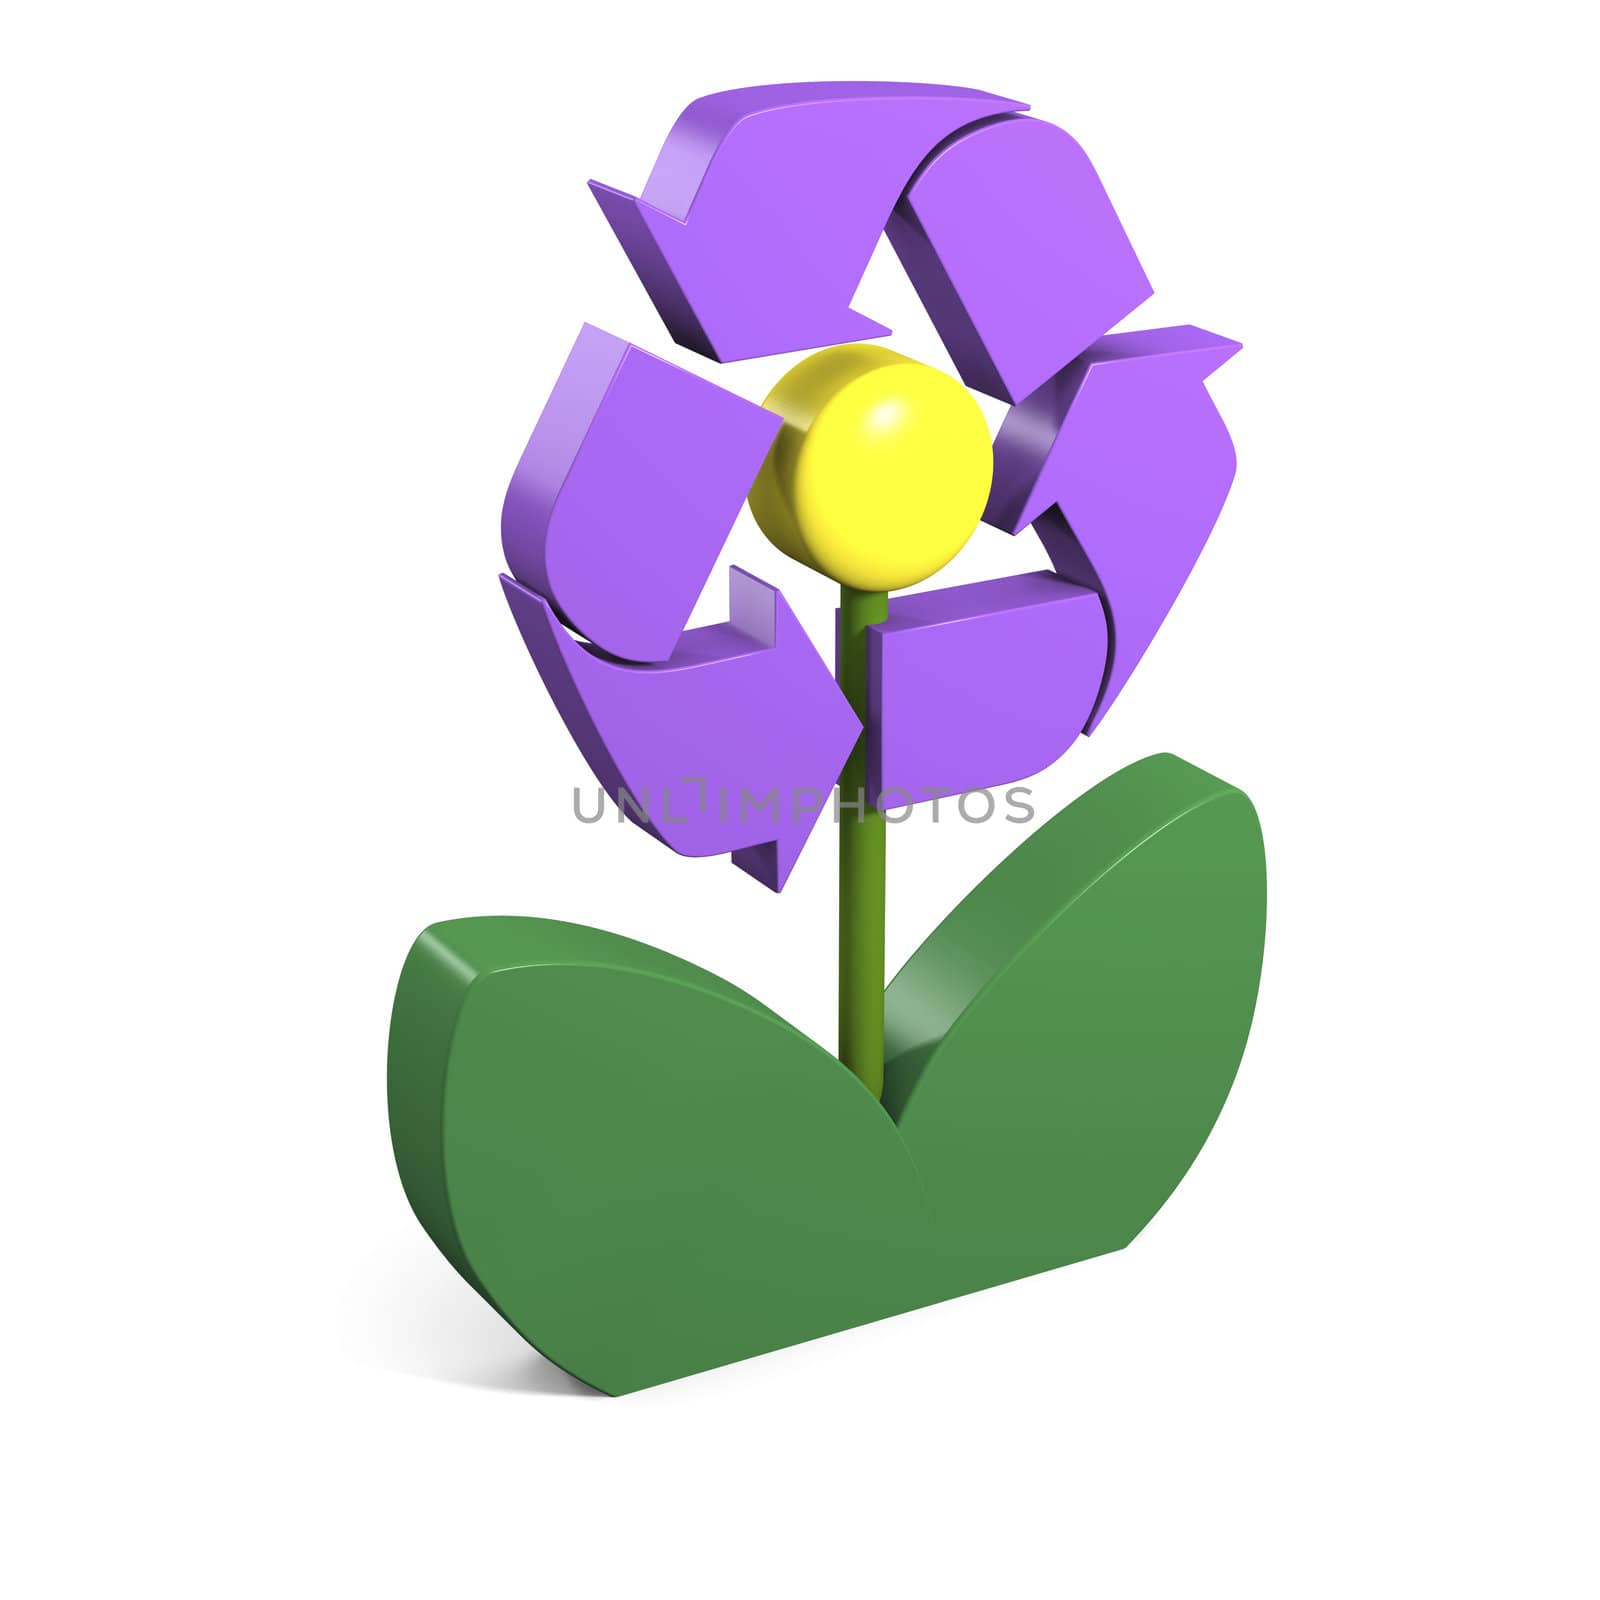 Recycling symbol on violet flower in three dimensional shape isolated on white background